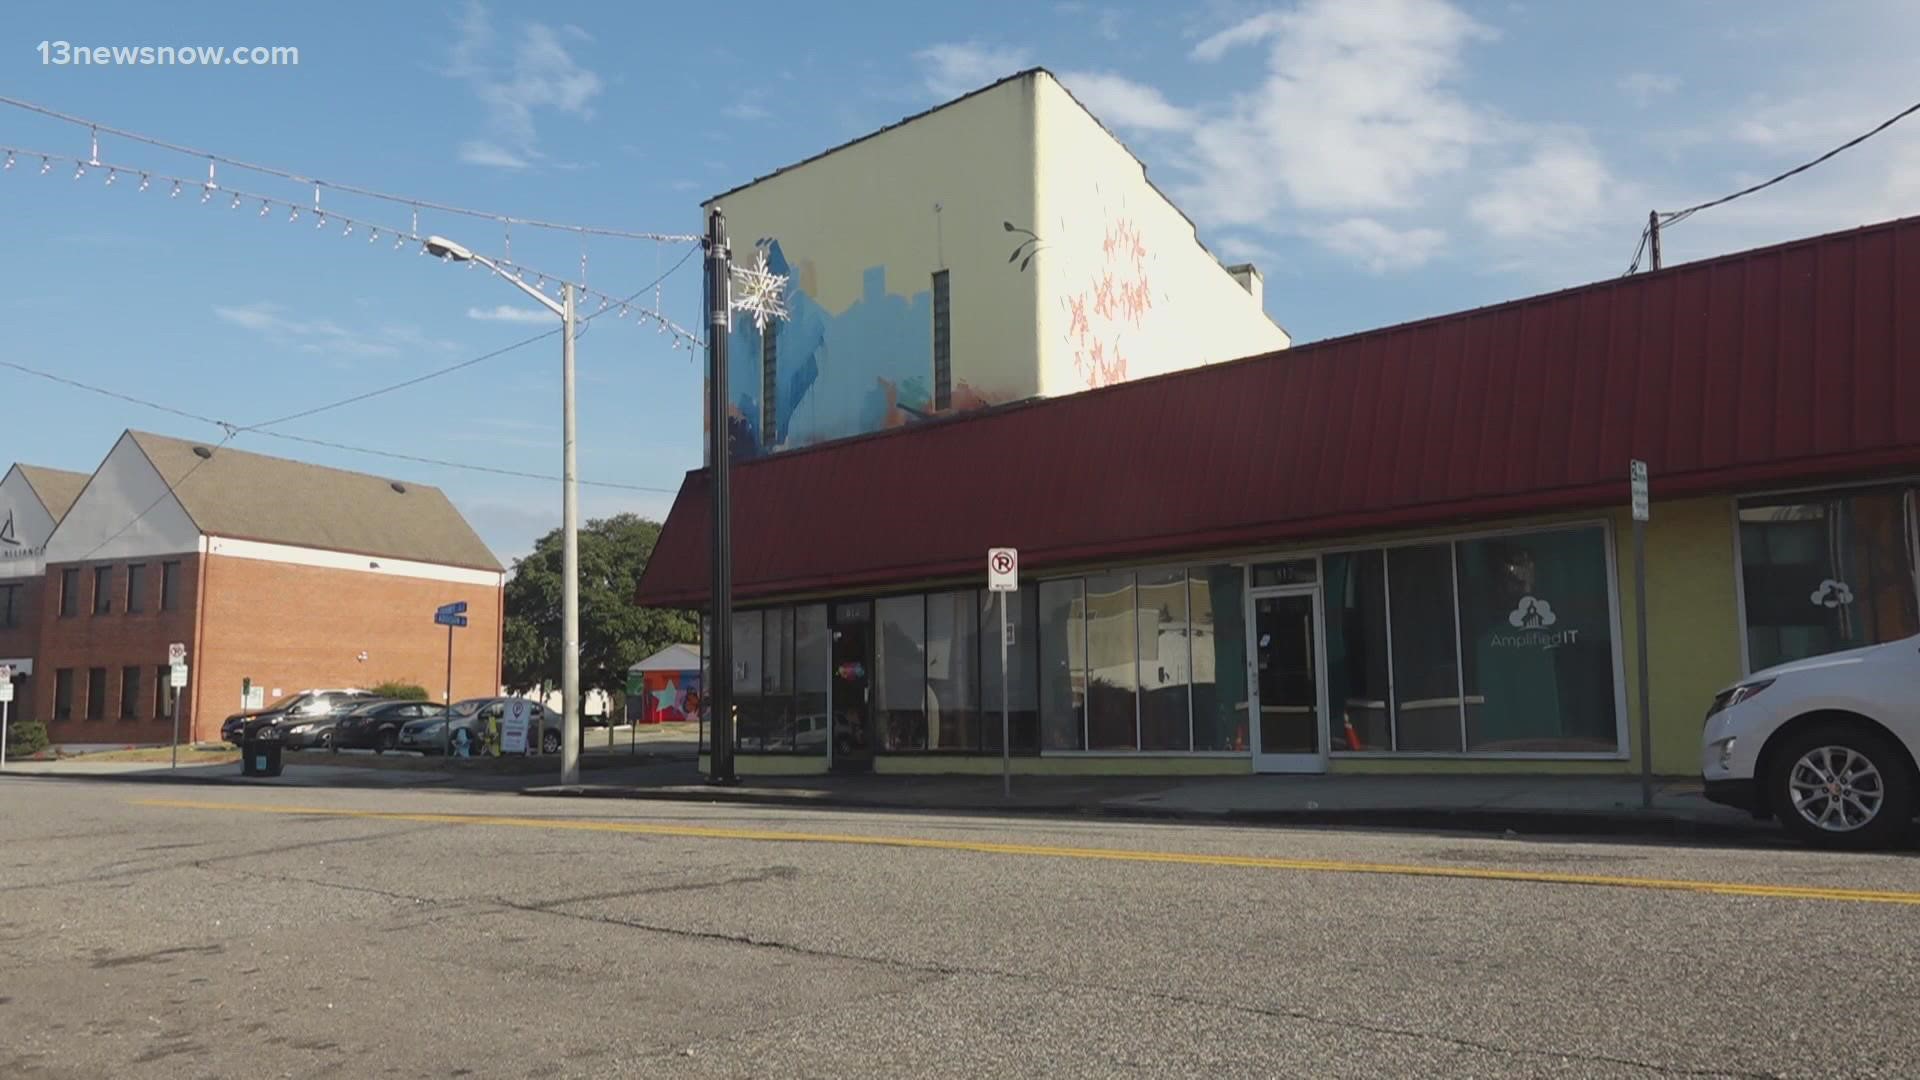 The vote happened Thursday morning. The Board of Zoning Appeals voted unanimously against Culture Lounge.